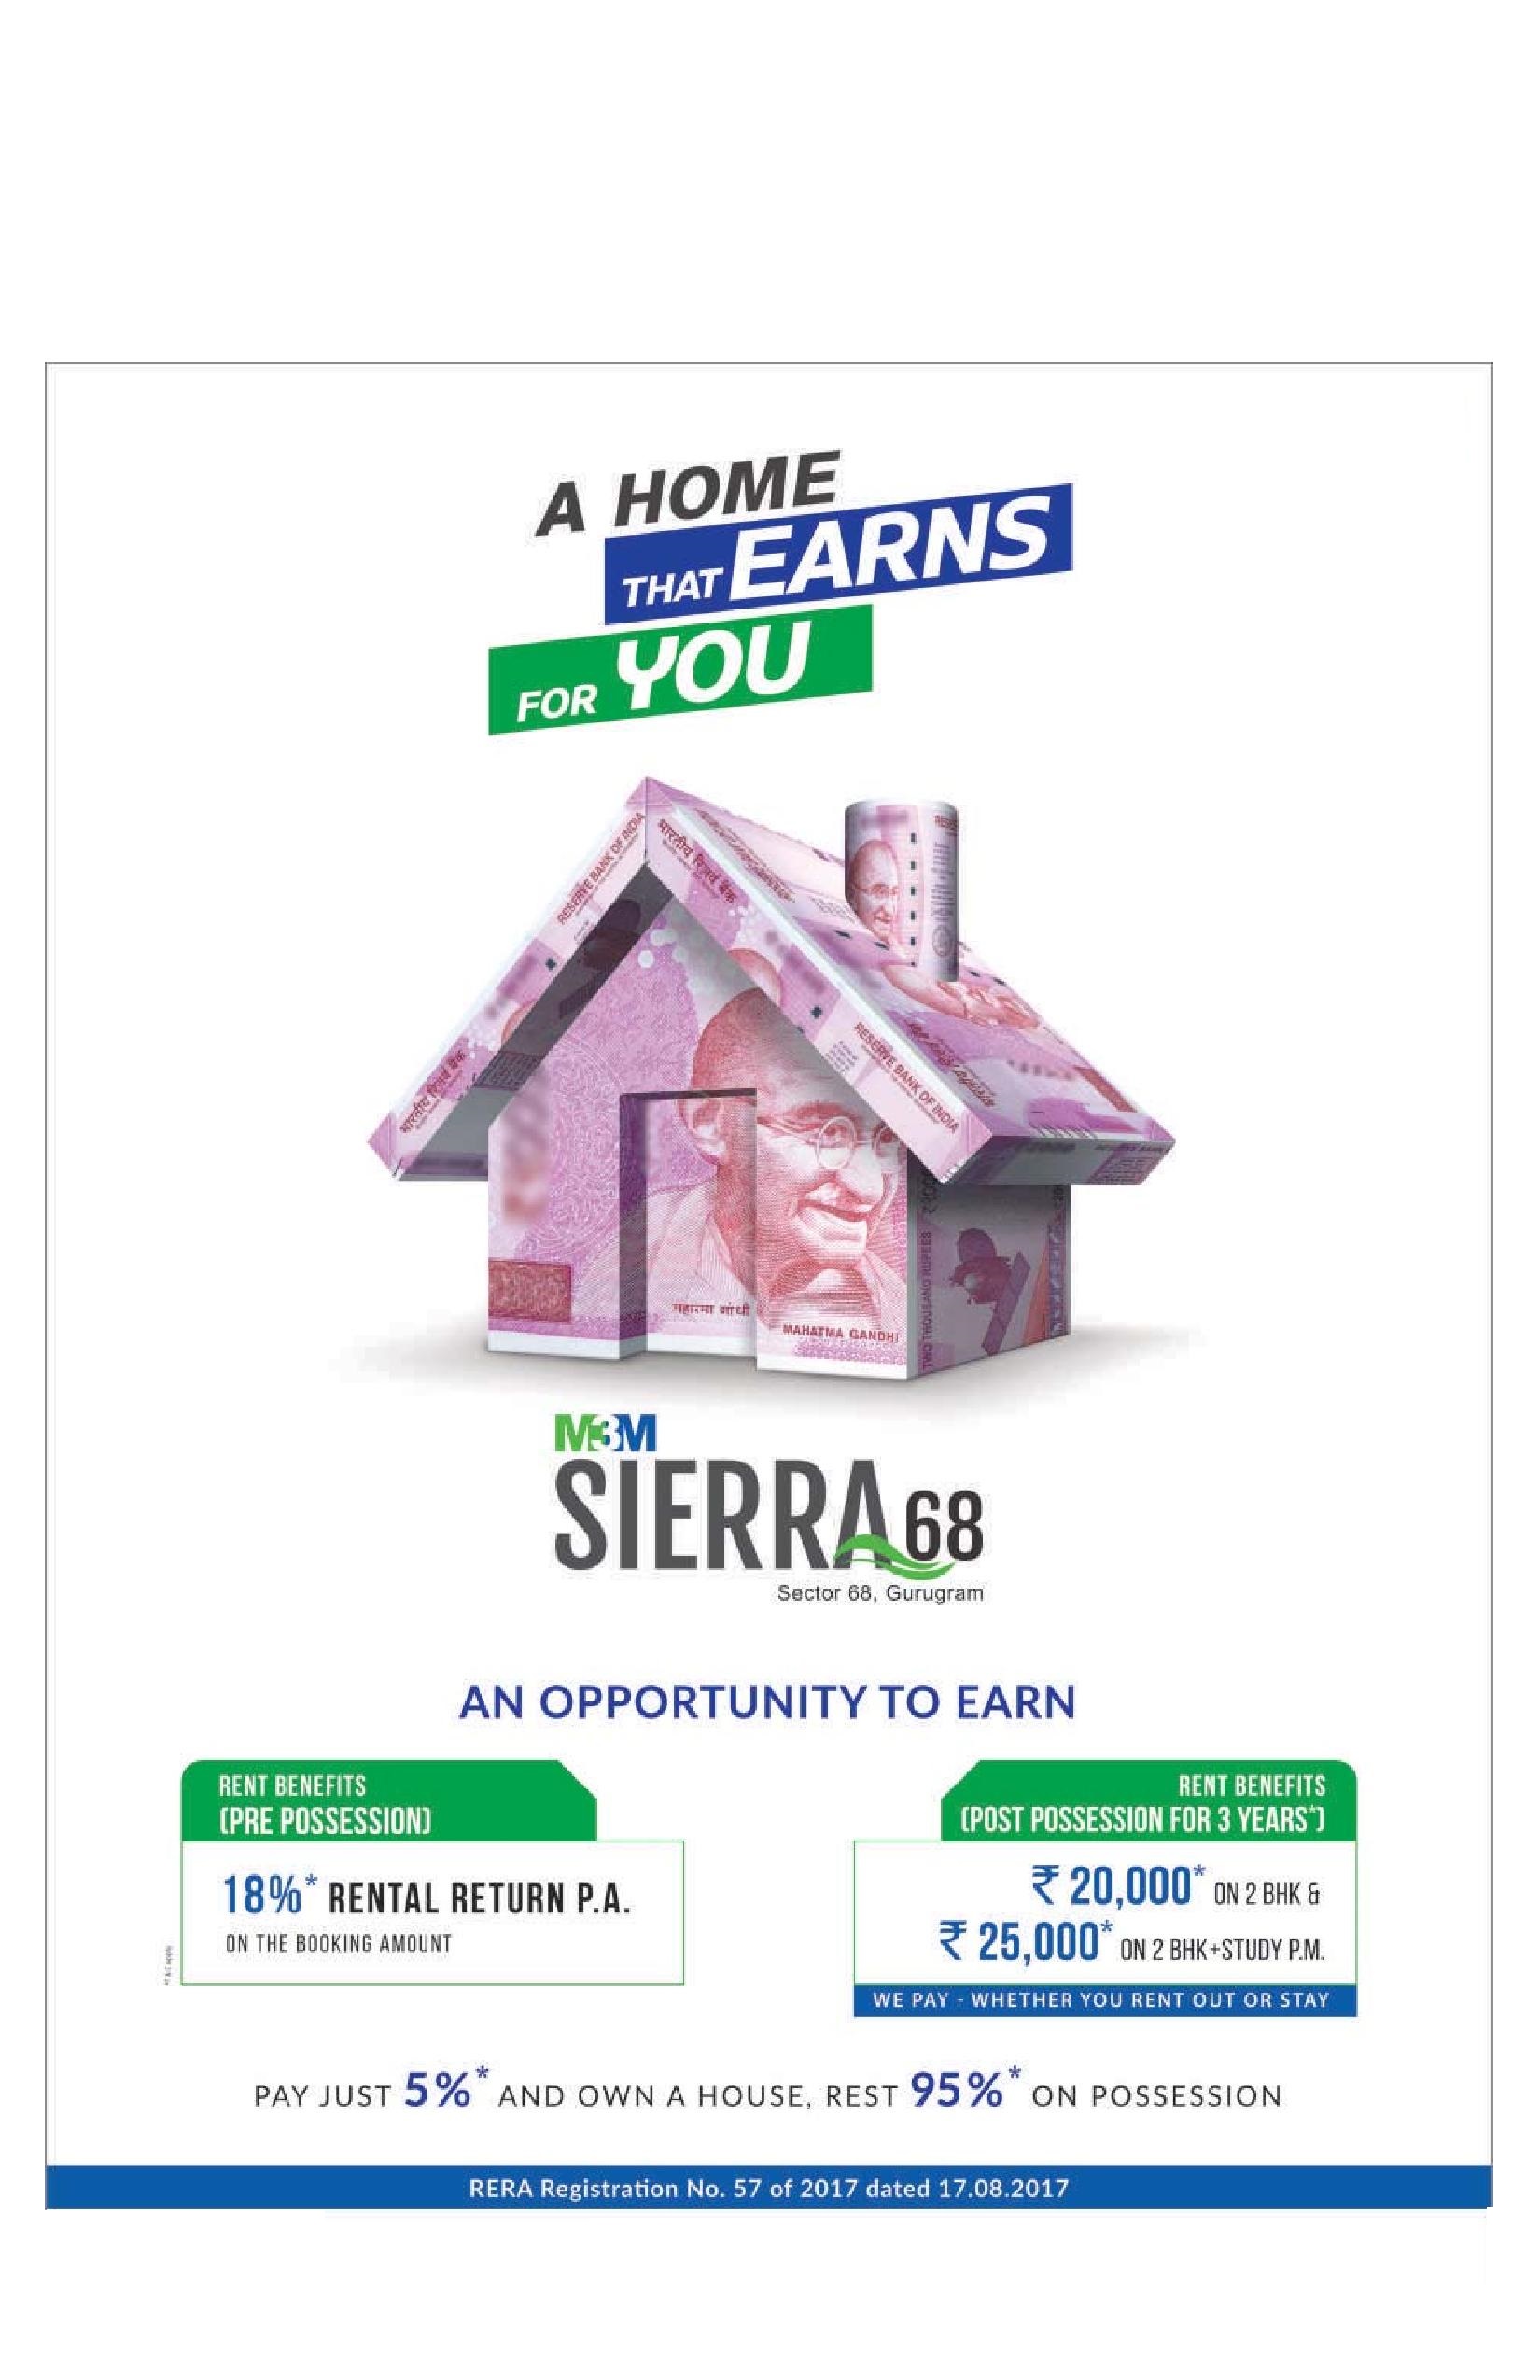 Pay just 5%  & rest 95% on possession at M3M Sierra in Gurgaon